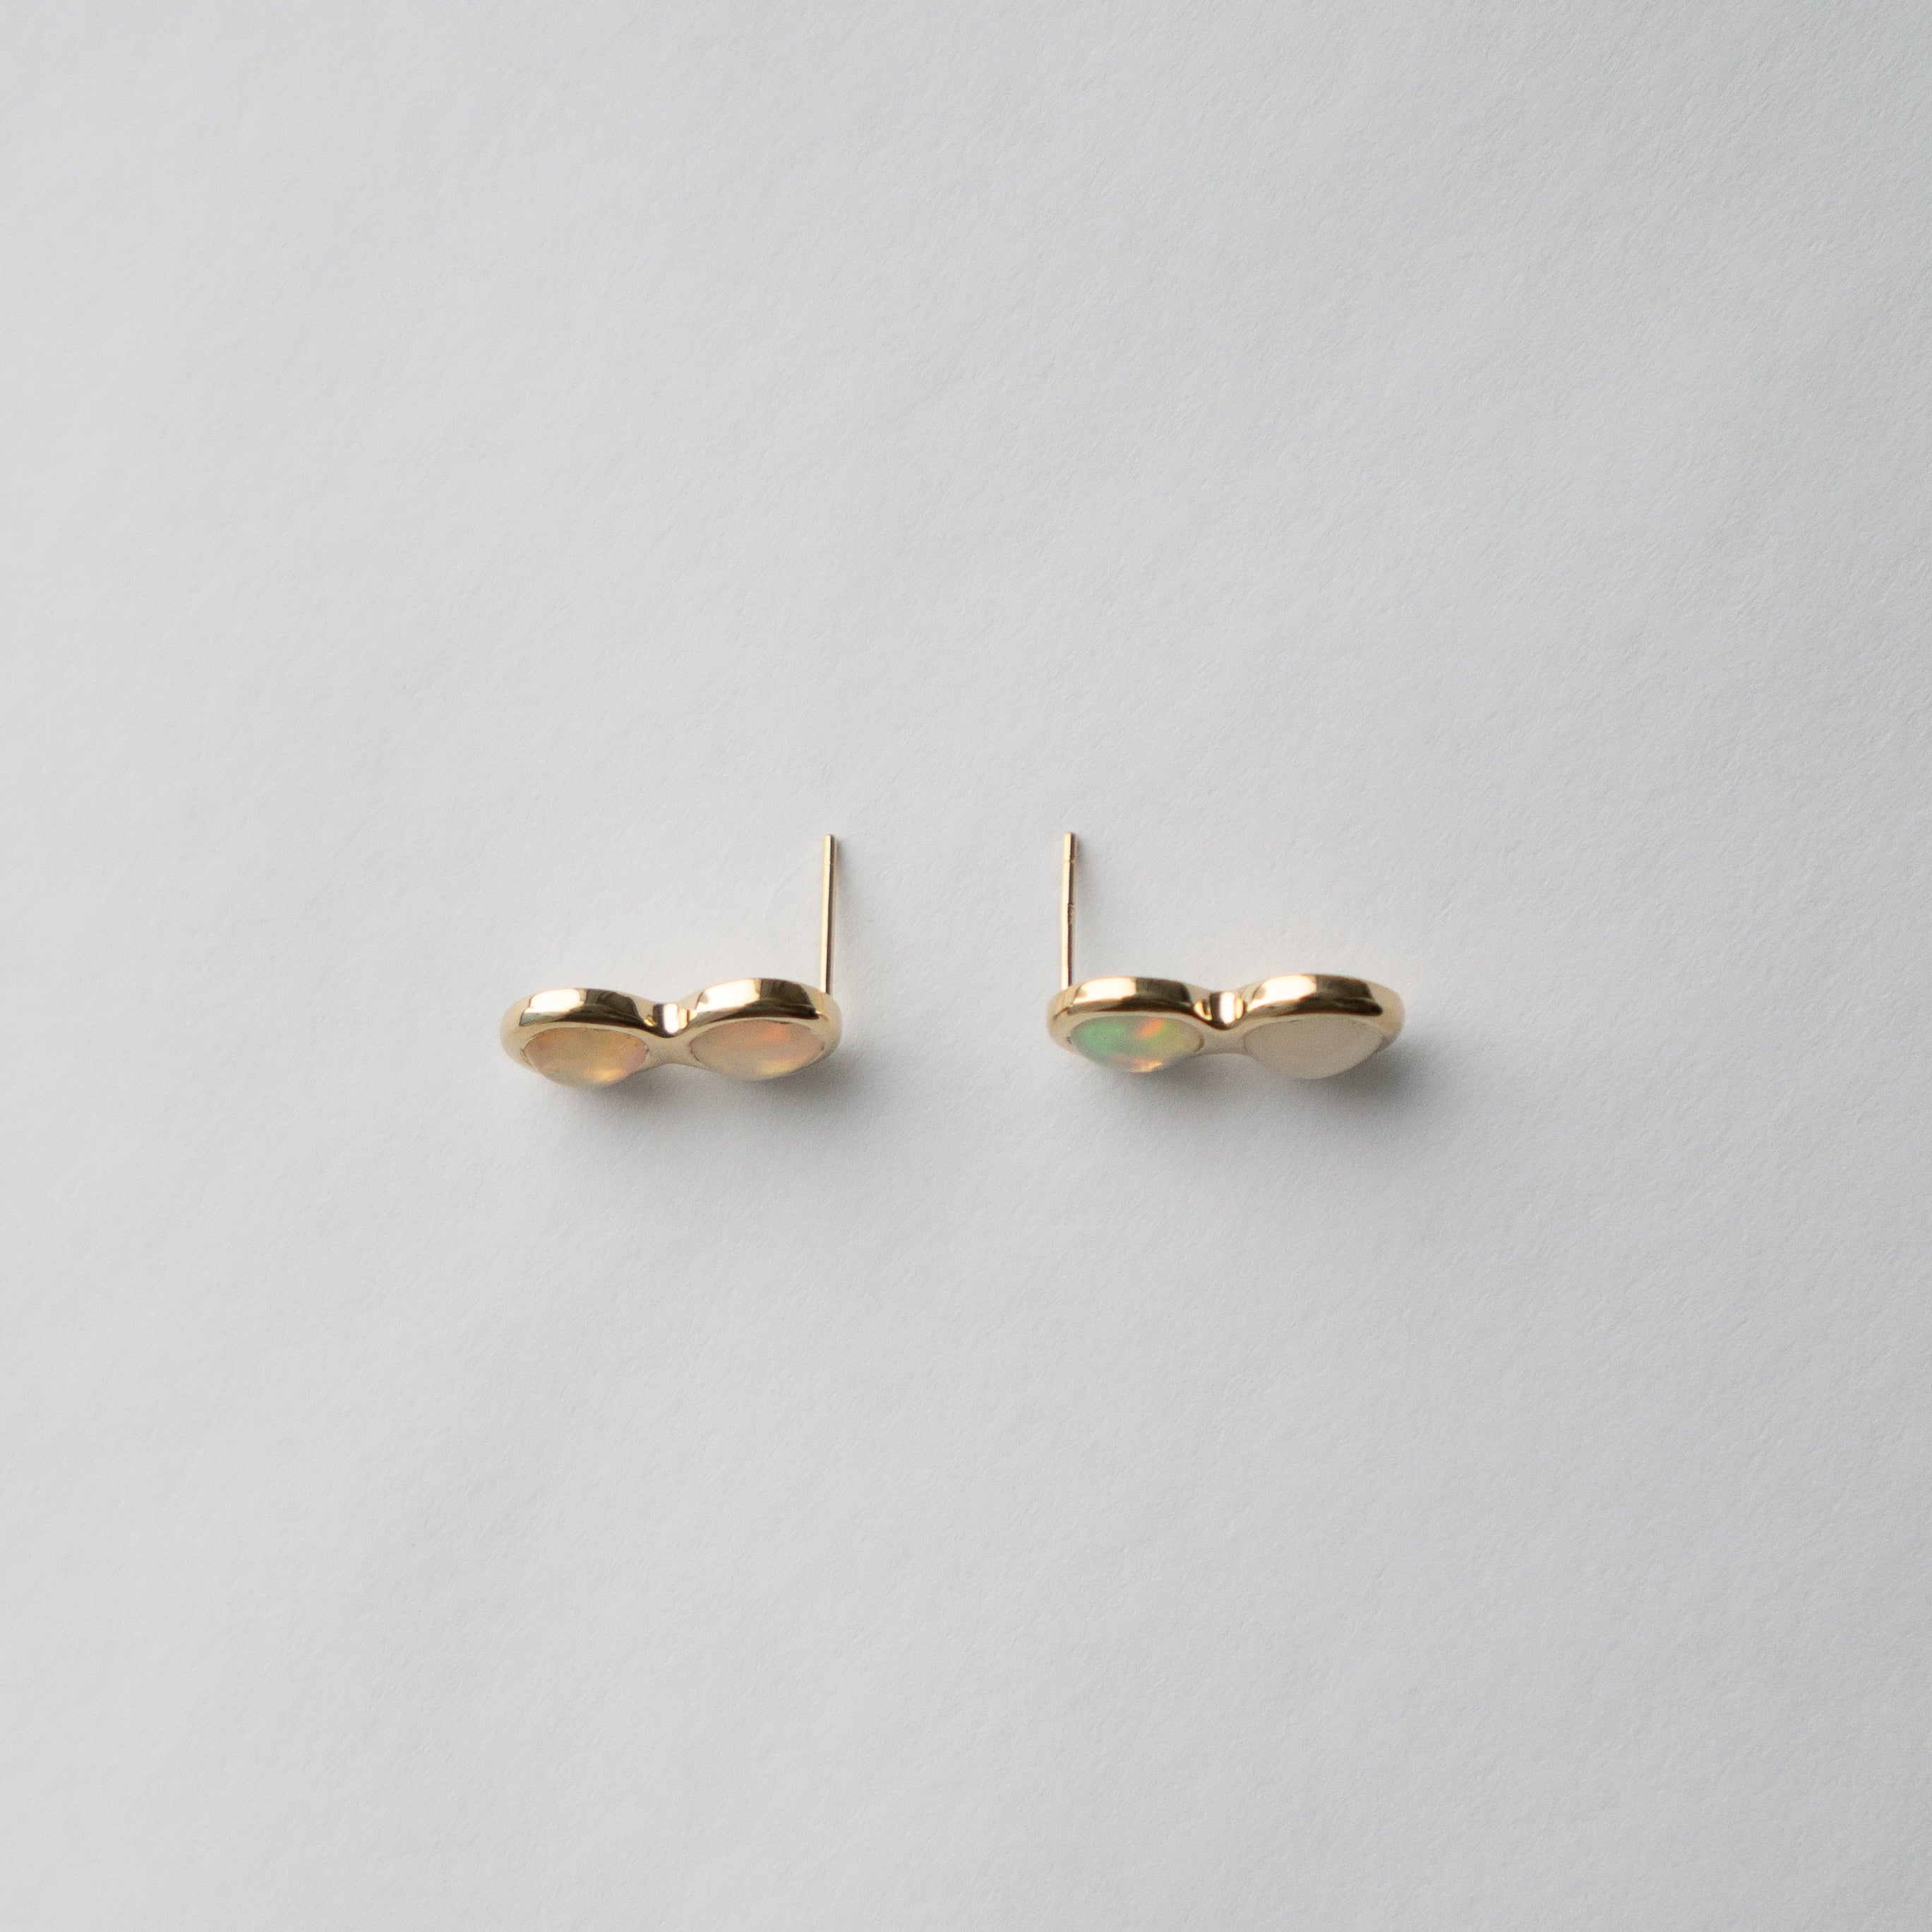 Unique Alia stud earrings in 14 karat yellow gold set with opal made in NYC by SHW fine Jewelry